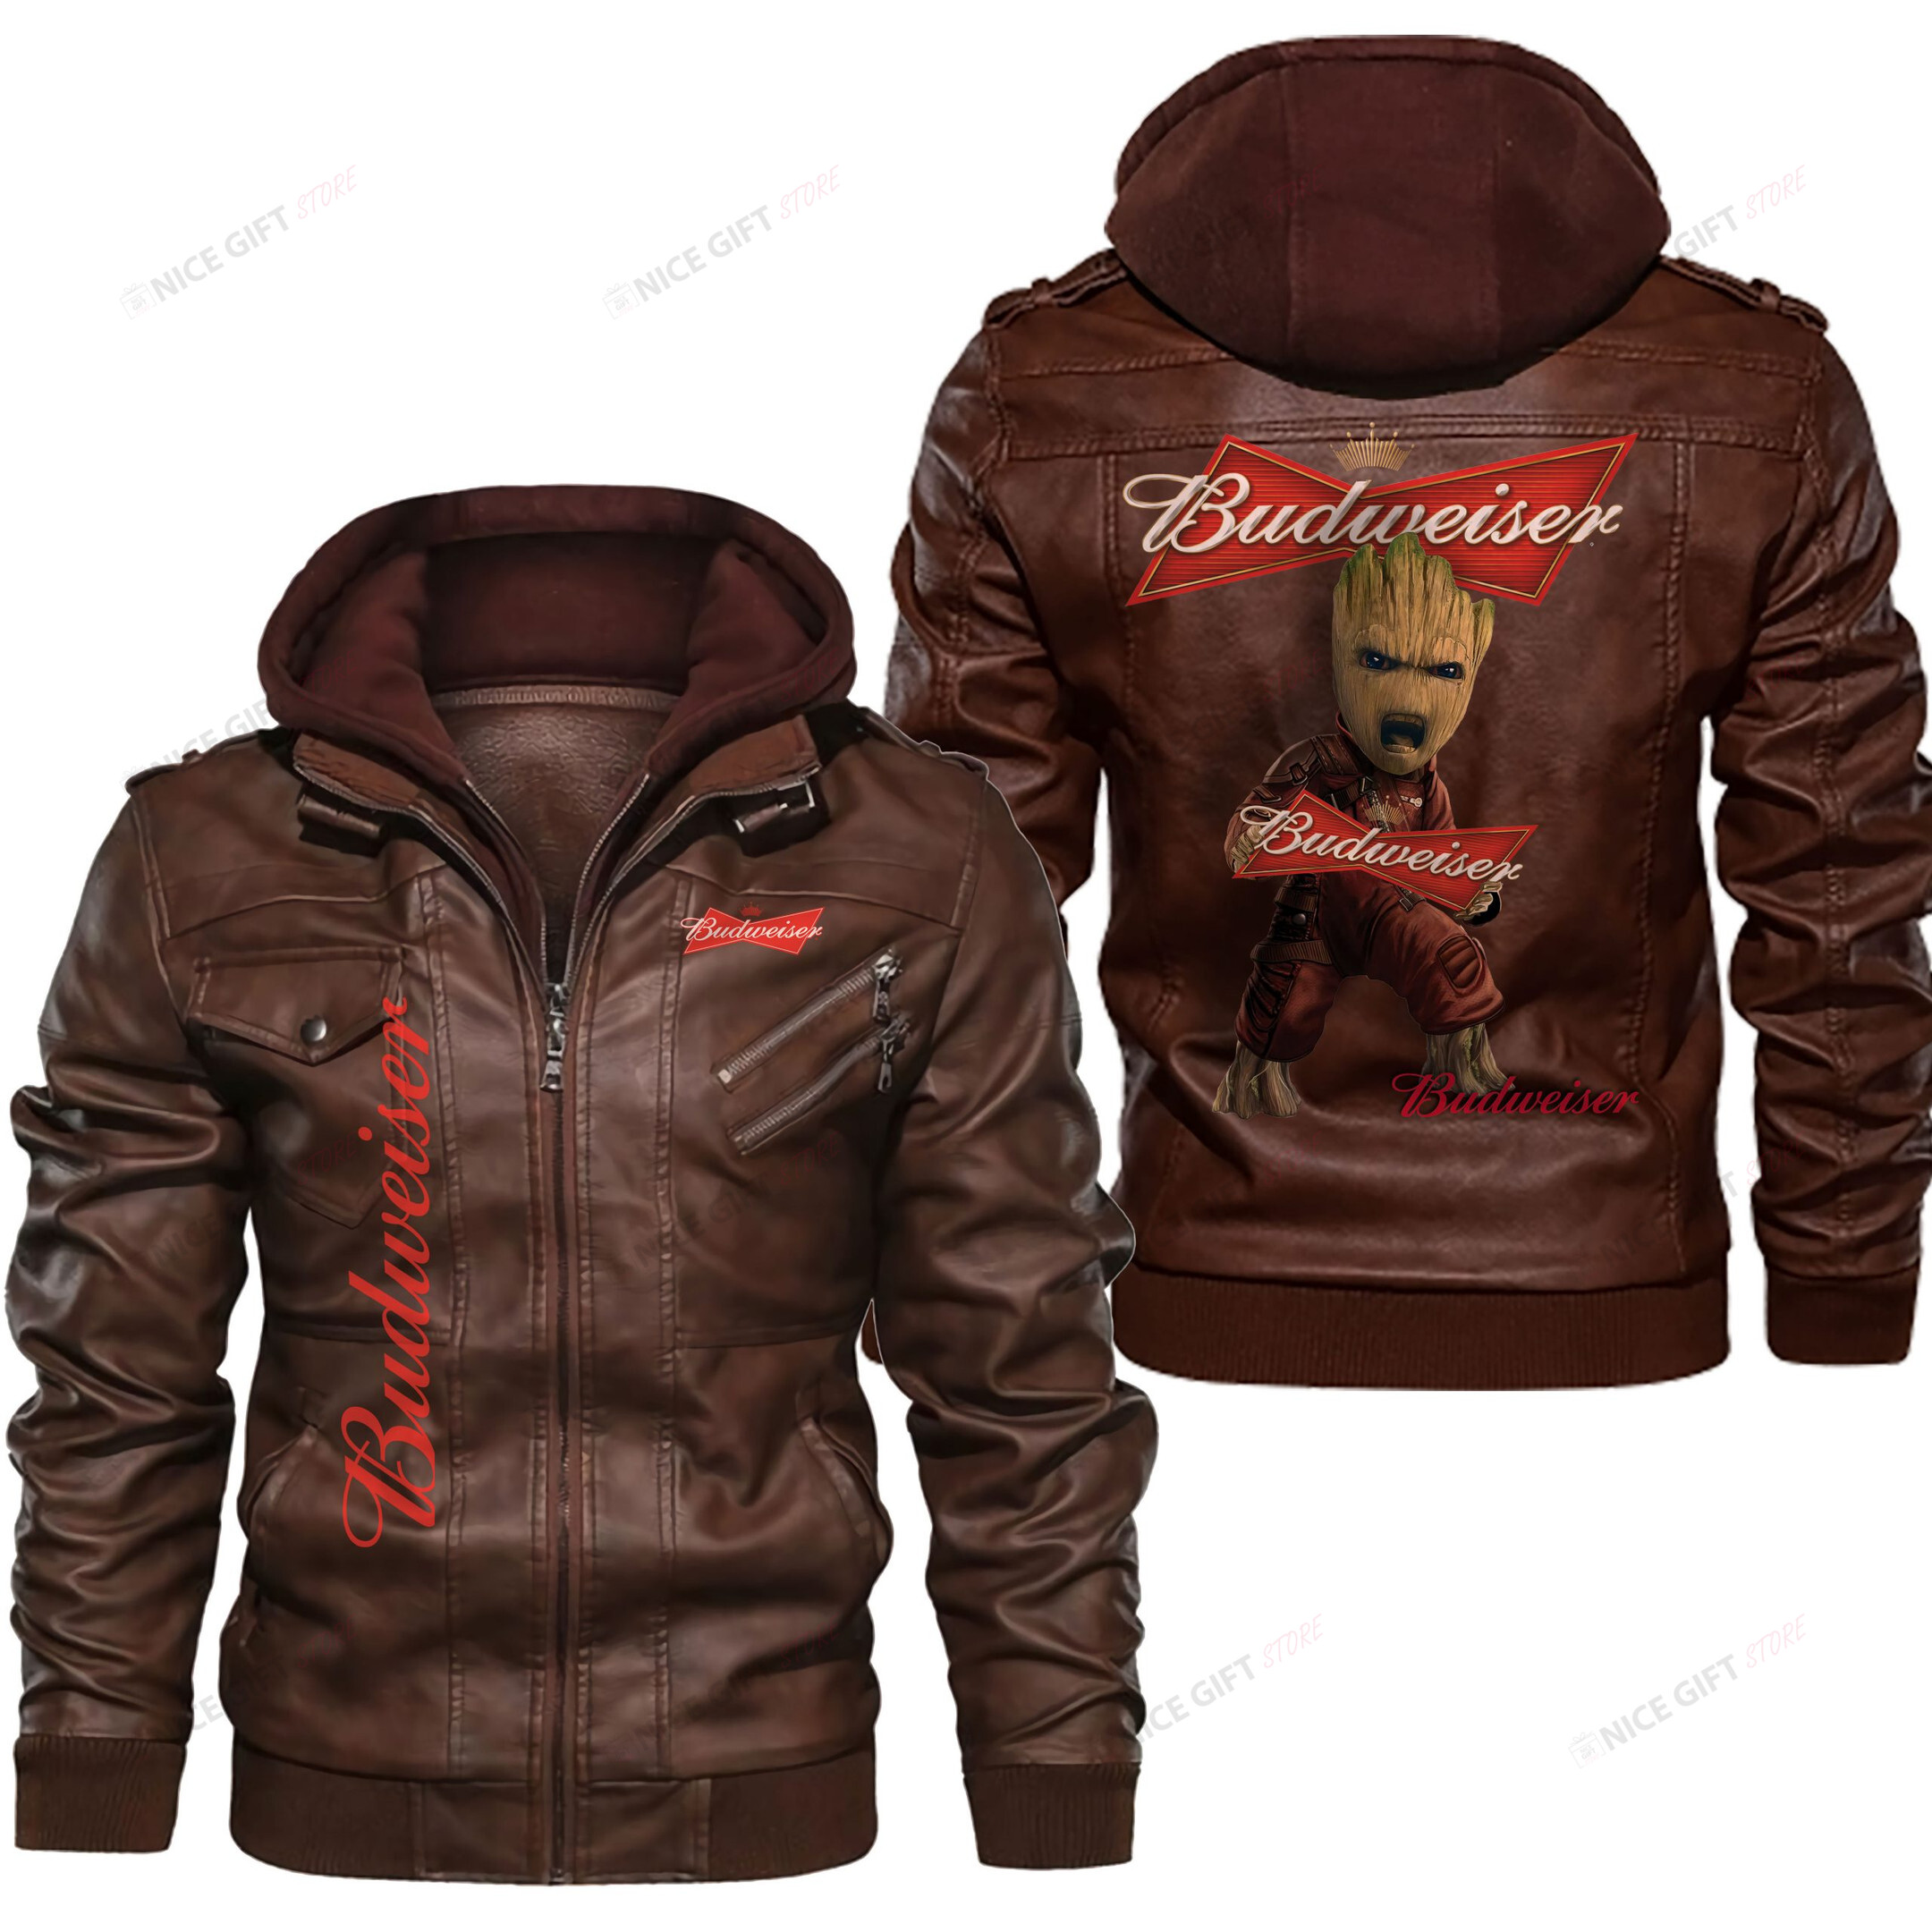 Get yourself a leather jacket! 123